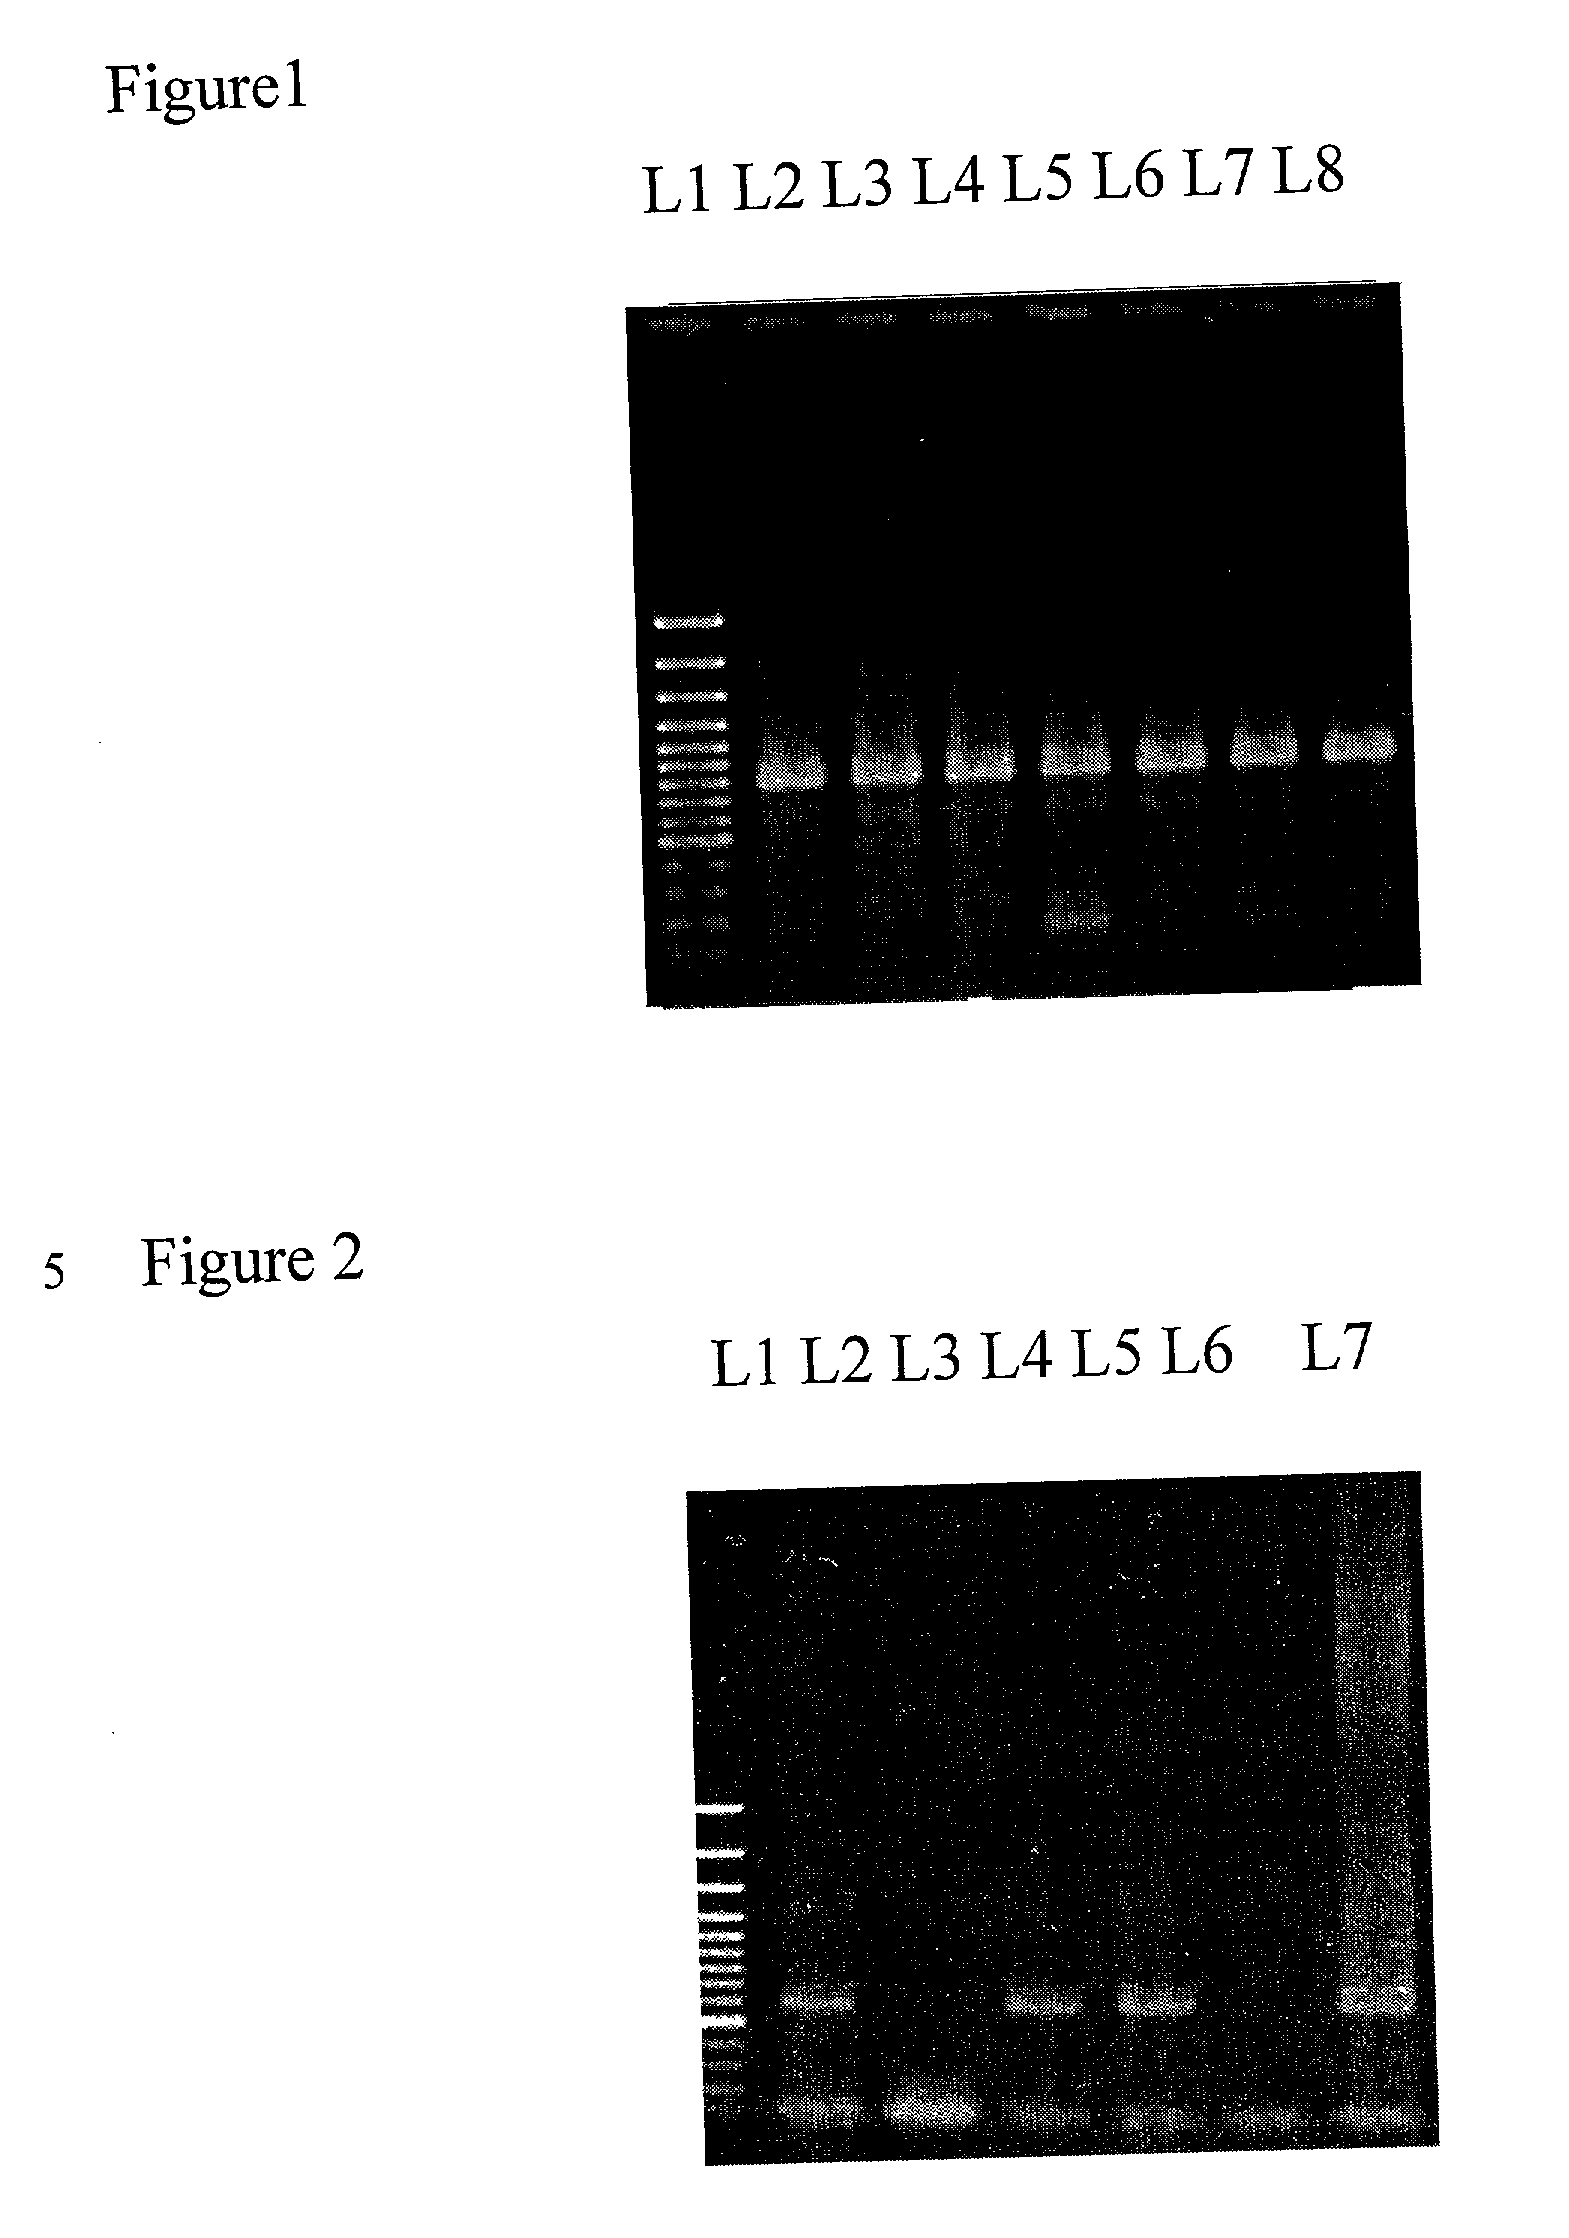 Method of utilizing ribonucleic acid as markers for product anti-counterfeit labeling and verification